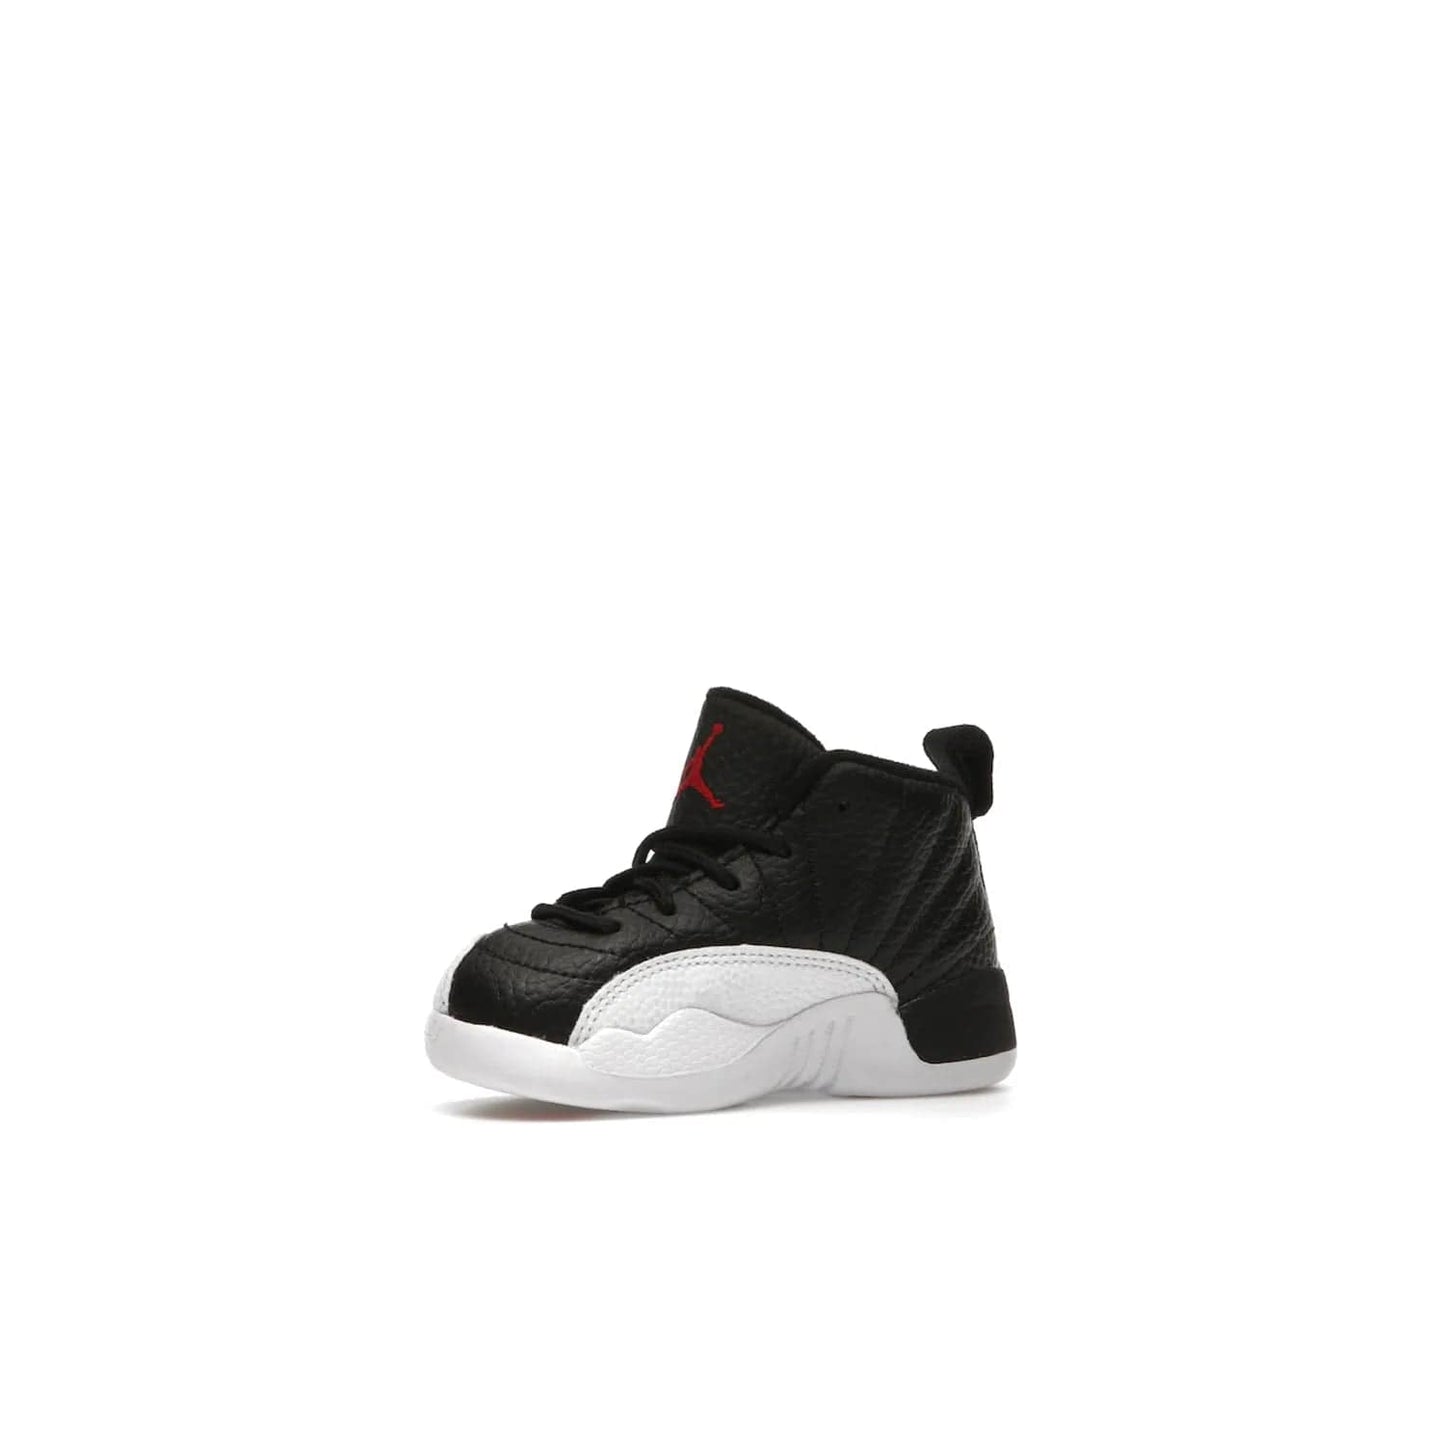 Jordan 12 Retro Playoffs (2022) (TD) - Image 16 - Only at www.BallersClubKickz.com - Stay stylish with the Air Jordan 12 Retro Playoffs 2022 (TD) toddler shoe. All-black upper with red and white accents plus subtle gold details. Bright white midsole and sole. Perfect for any outing or special event.